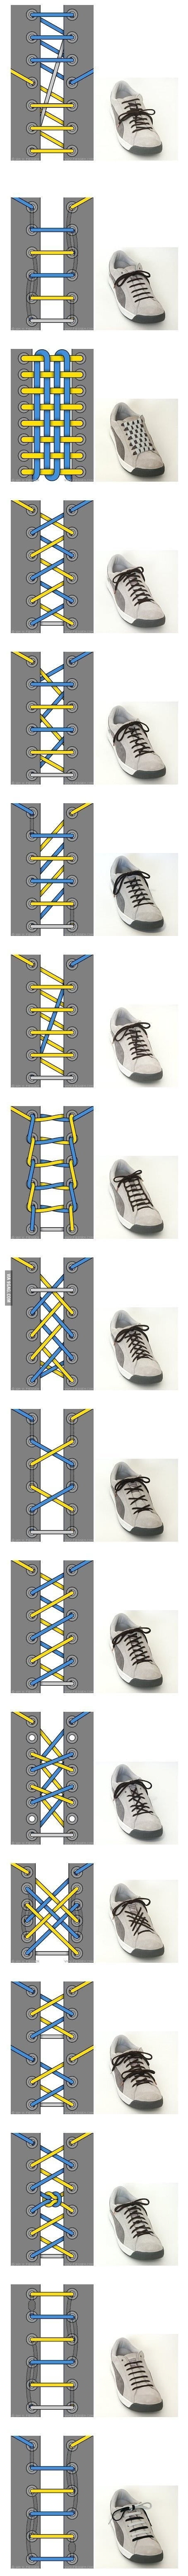 different way of tying shoelaces